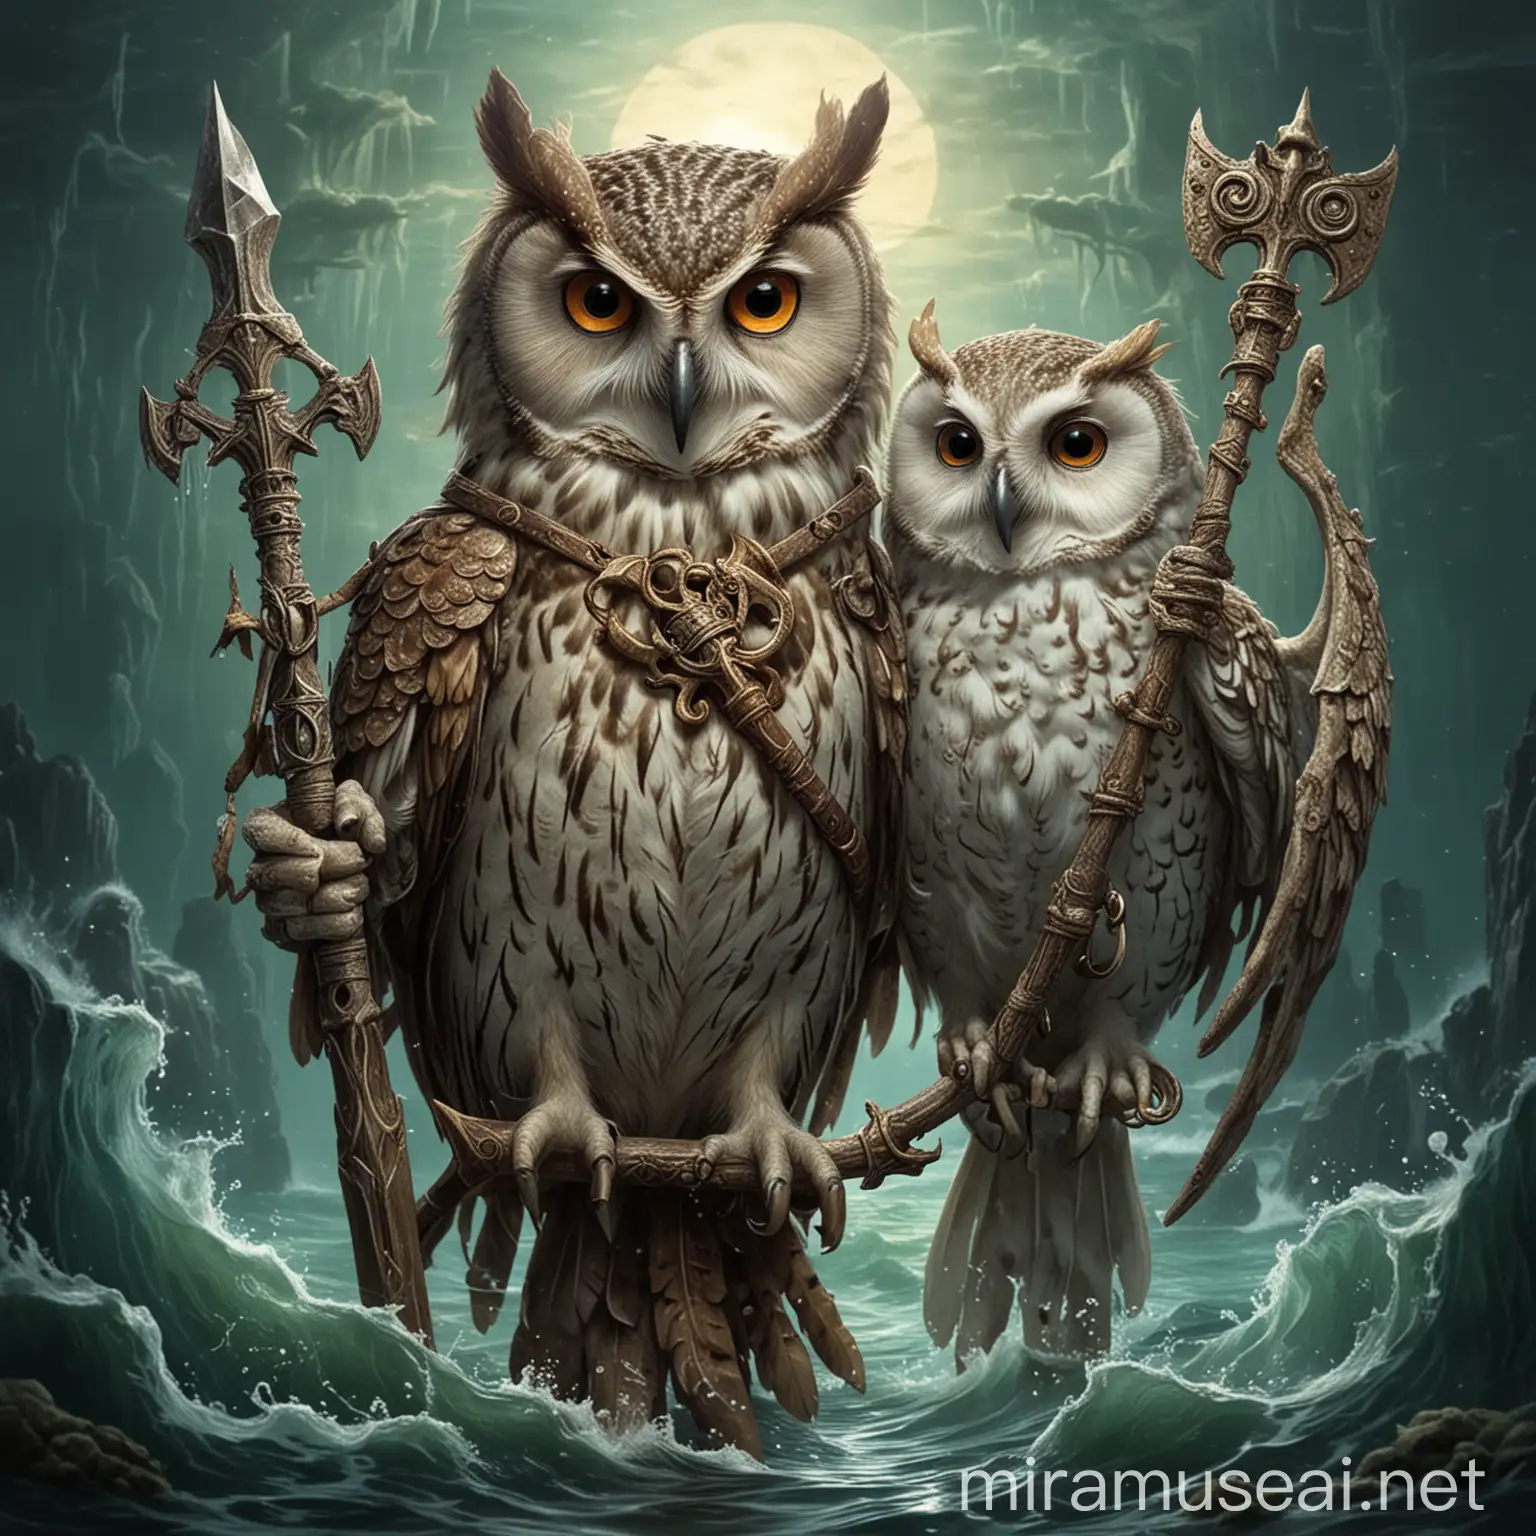 Majestic Owl and Seahorse Pose with Trident Underwater